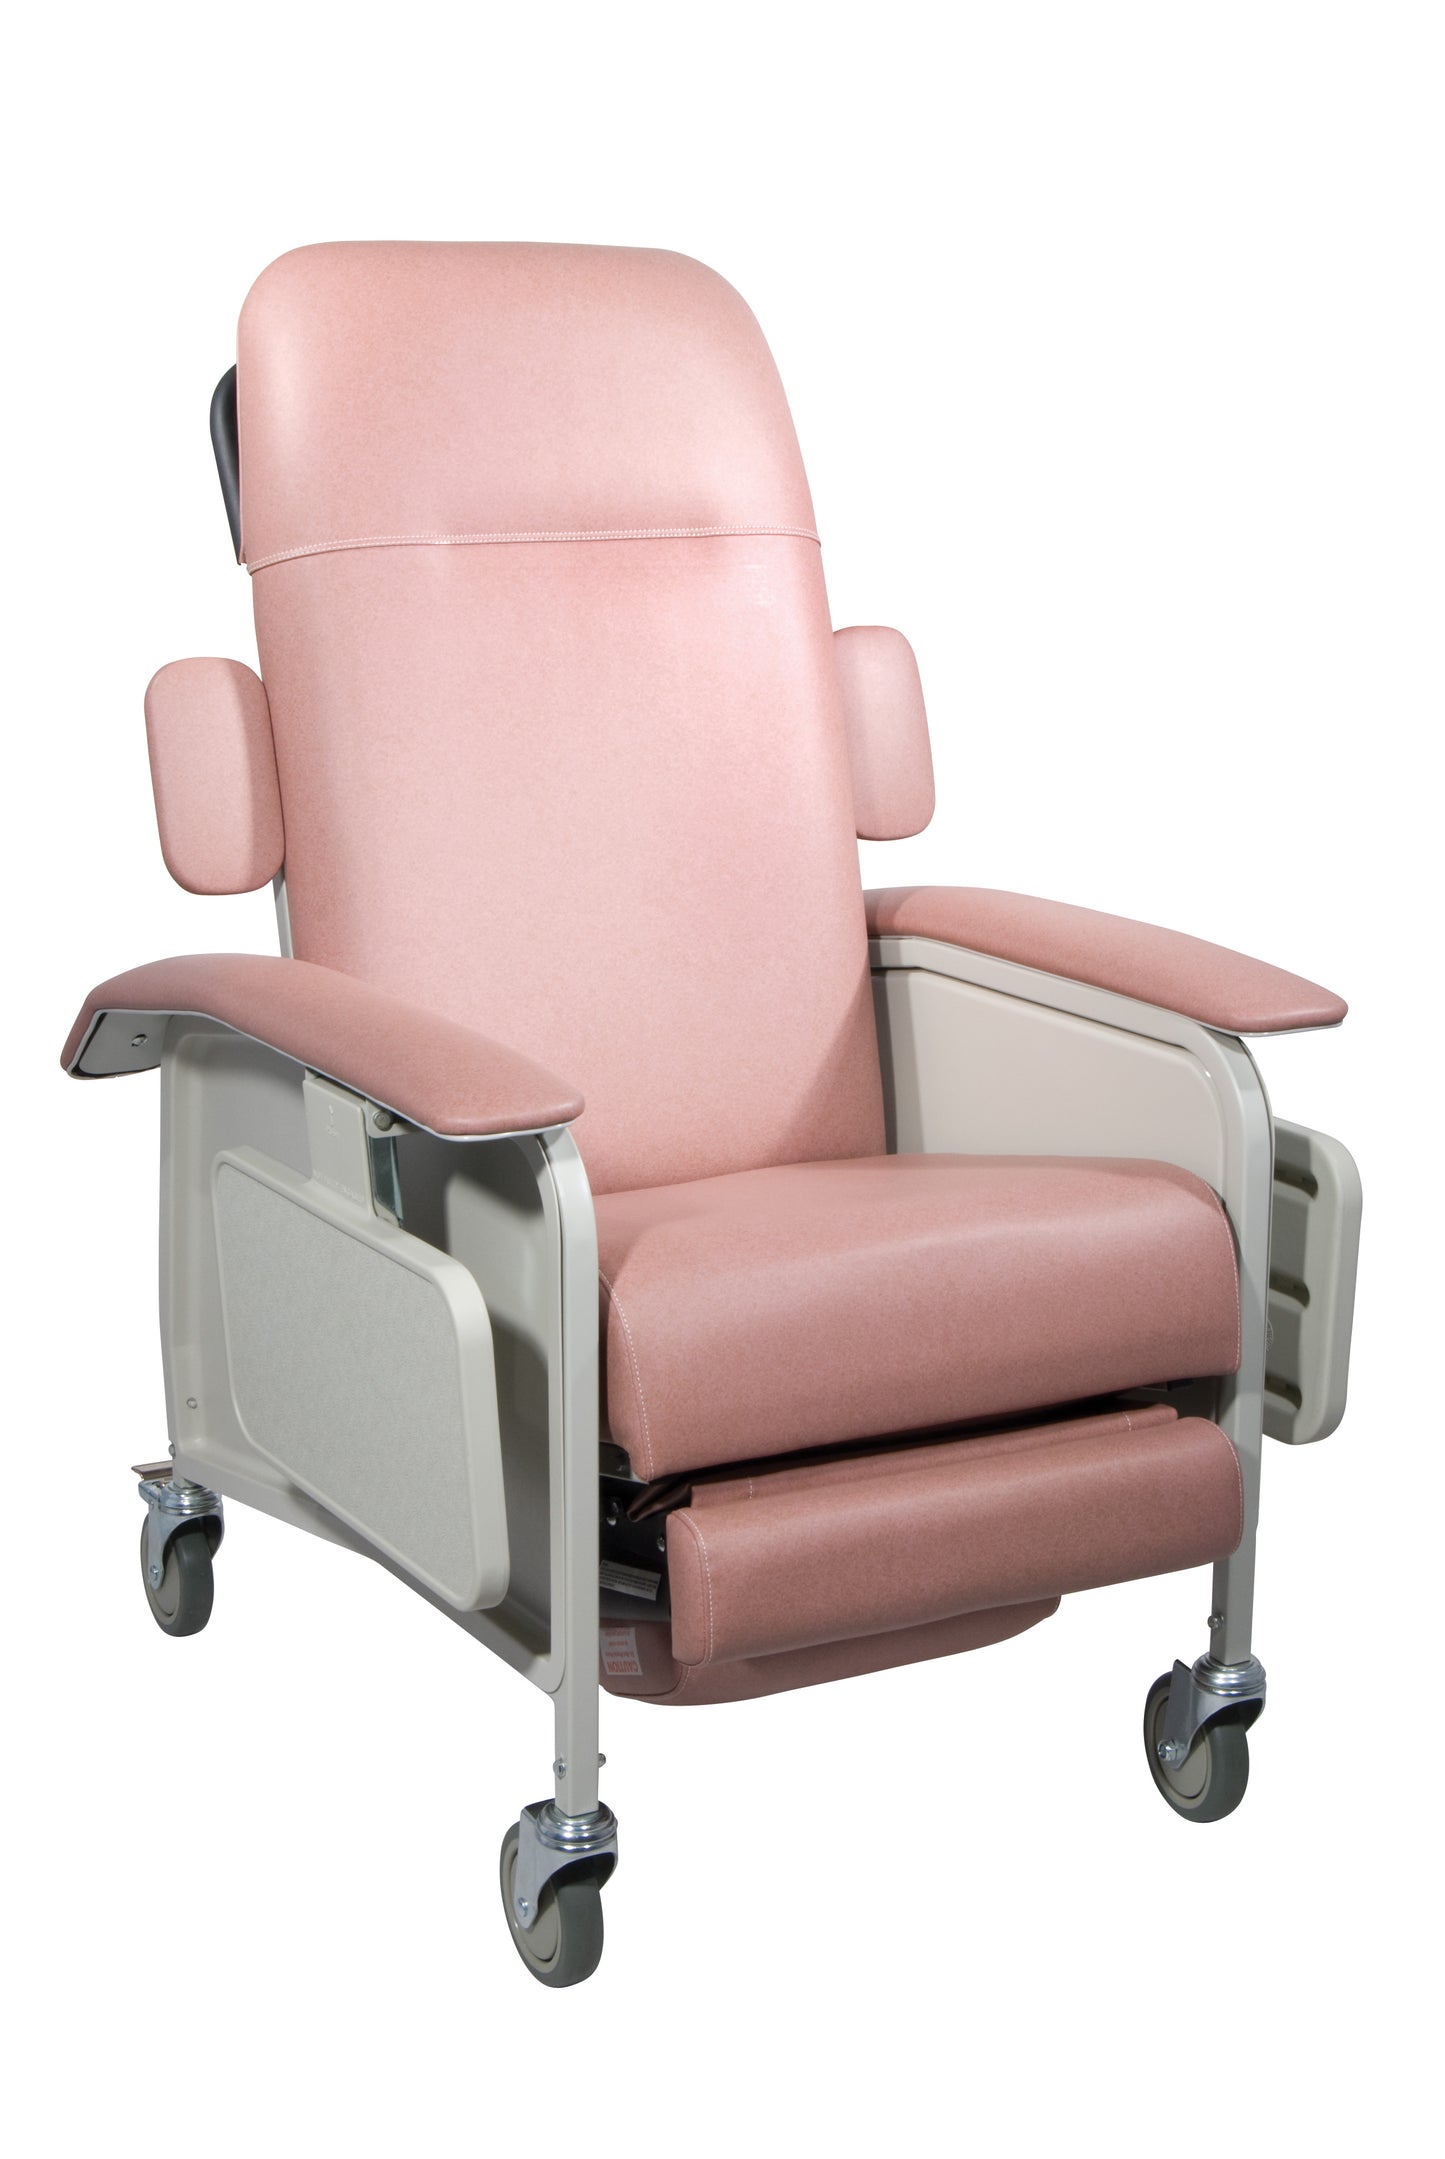 Clinical Care Geri Chair Recliner, Rosewood